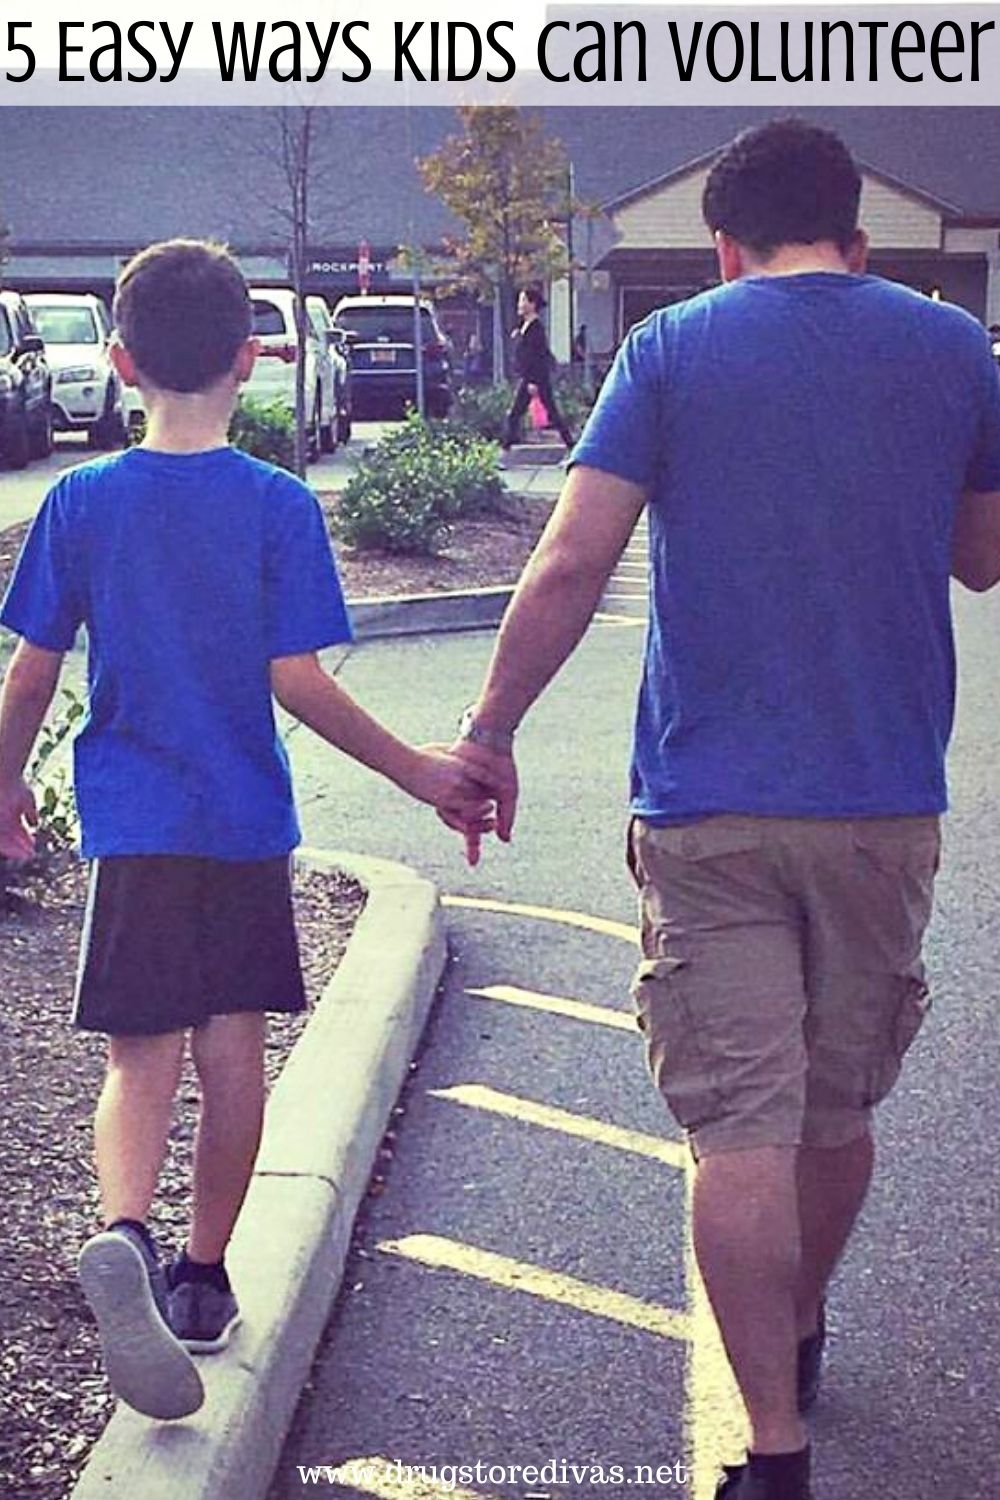 A man and a boy holding hands, walking into a store, with the words "5 Ways Kids Can Volunteer" digitally written on top.